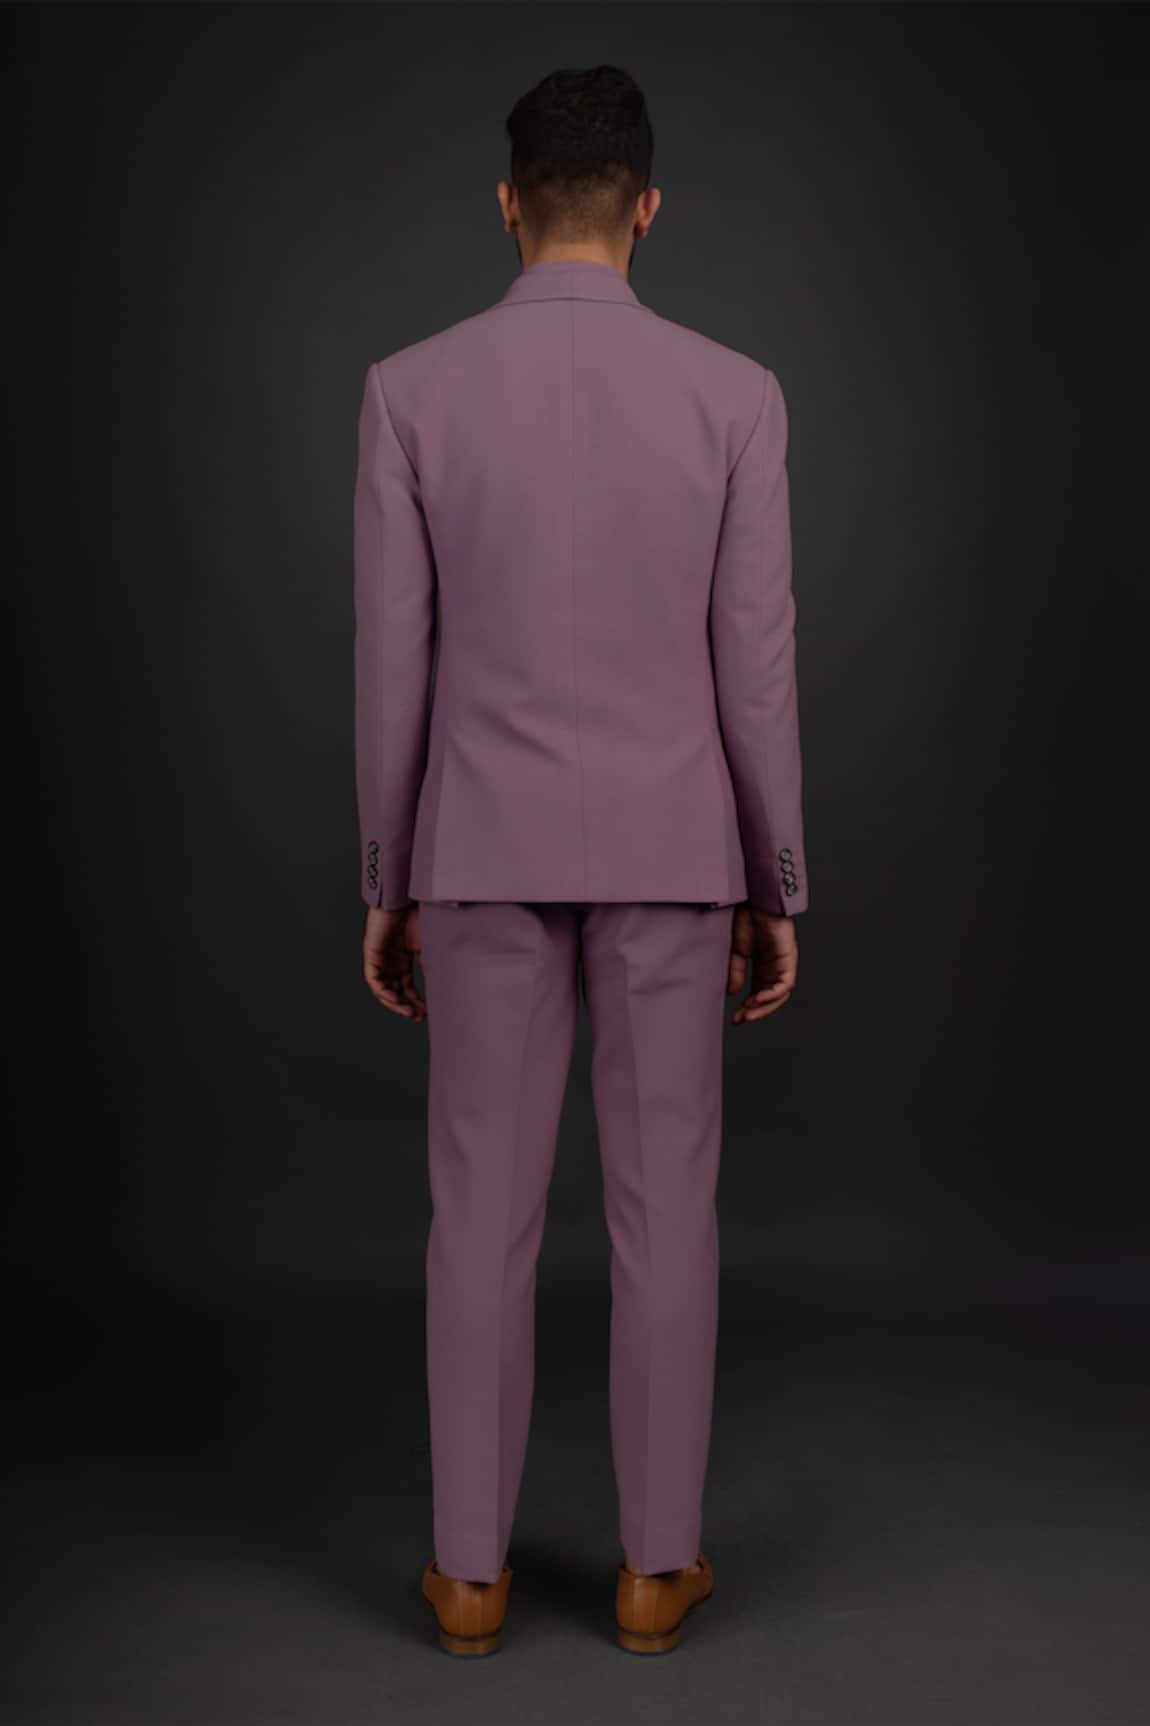 LUXURIOUS PURPLE PANTS Make a statement with this pant in a rich purple hue  woven in luxurious medi  African shirts for men Fashion suits for men  African shirts